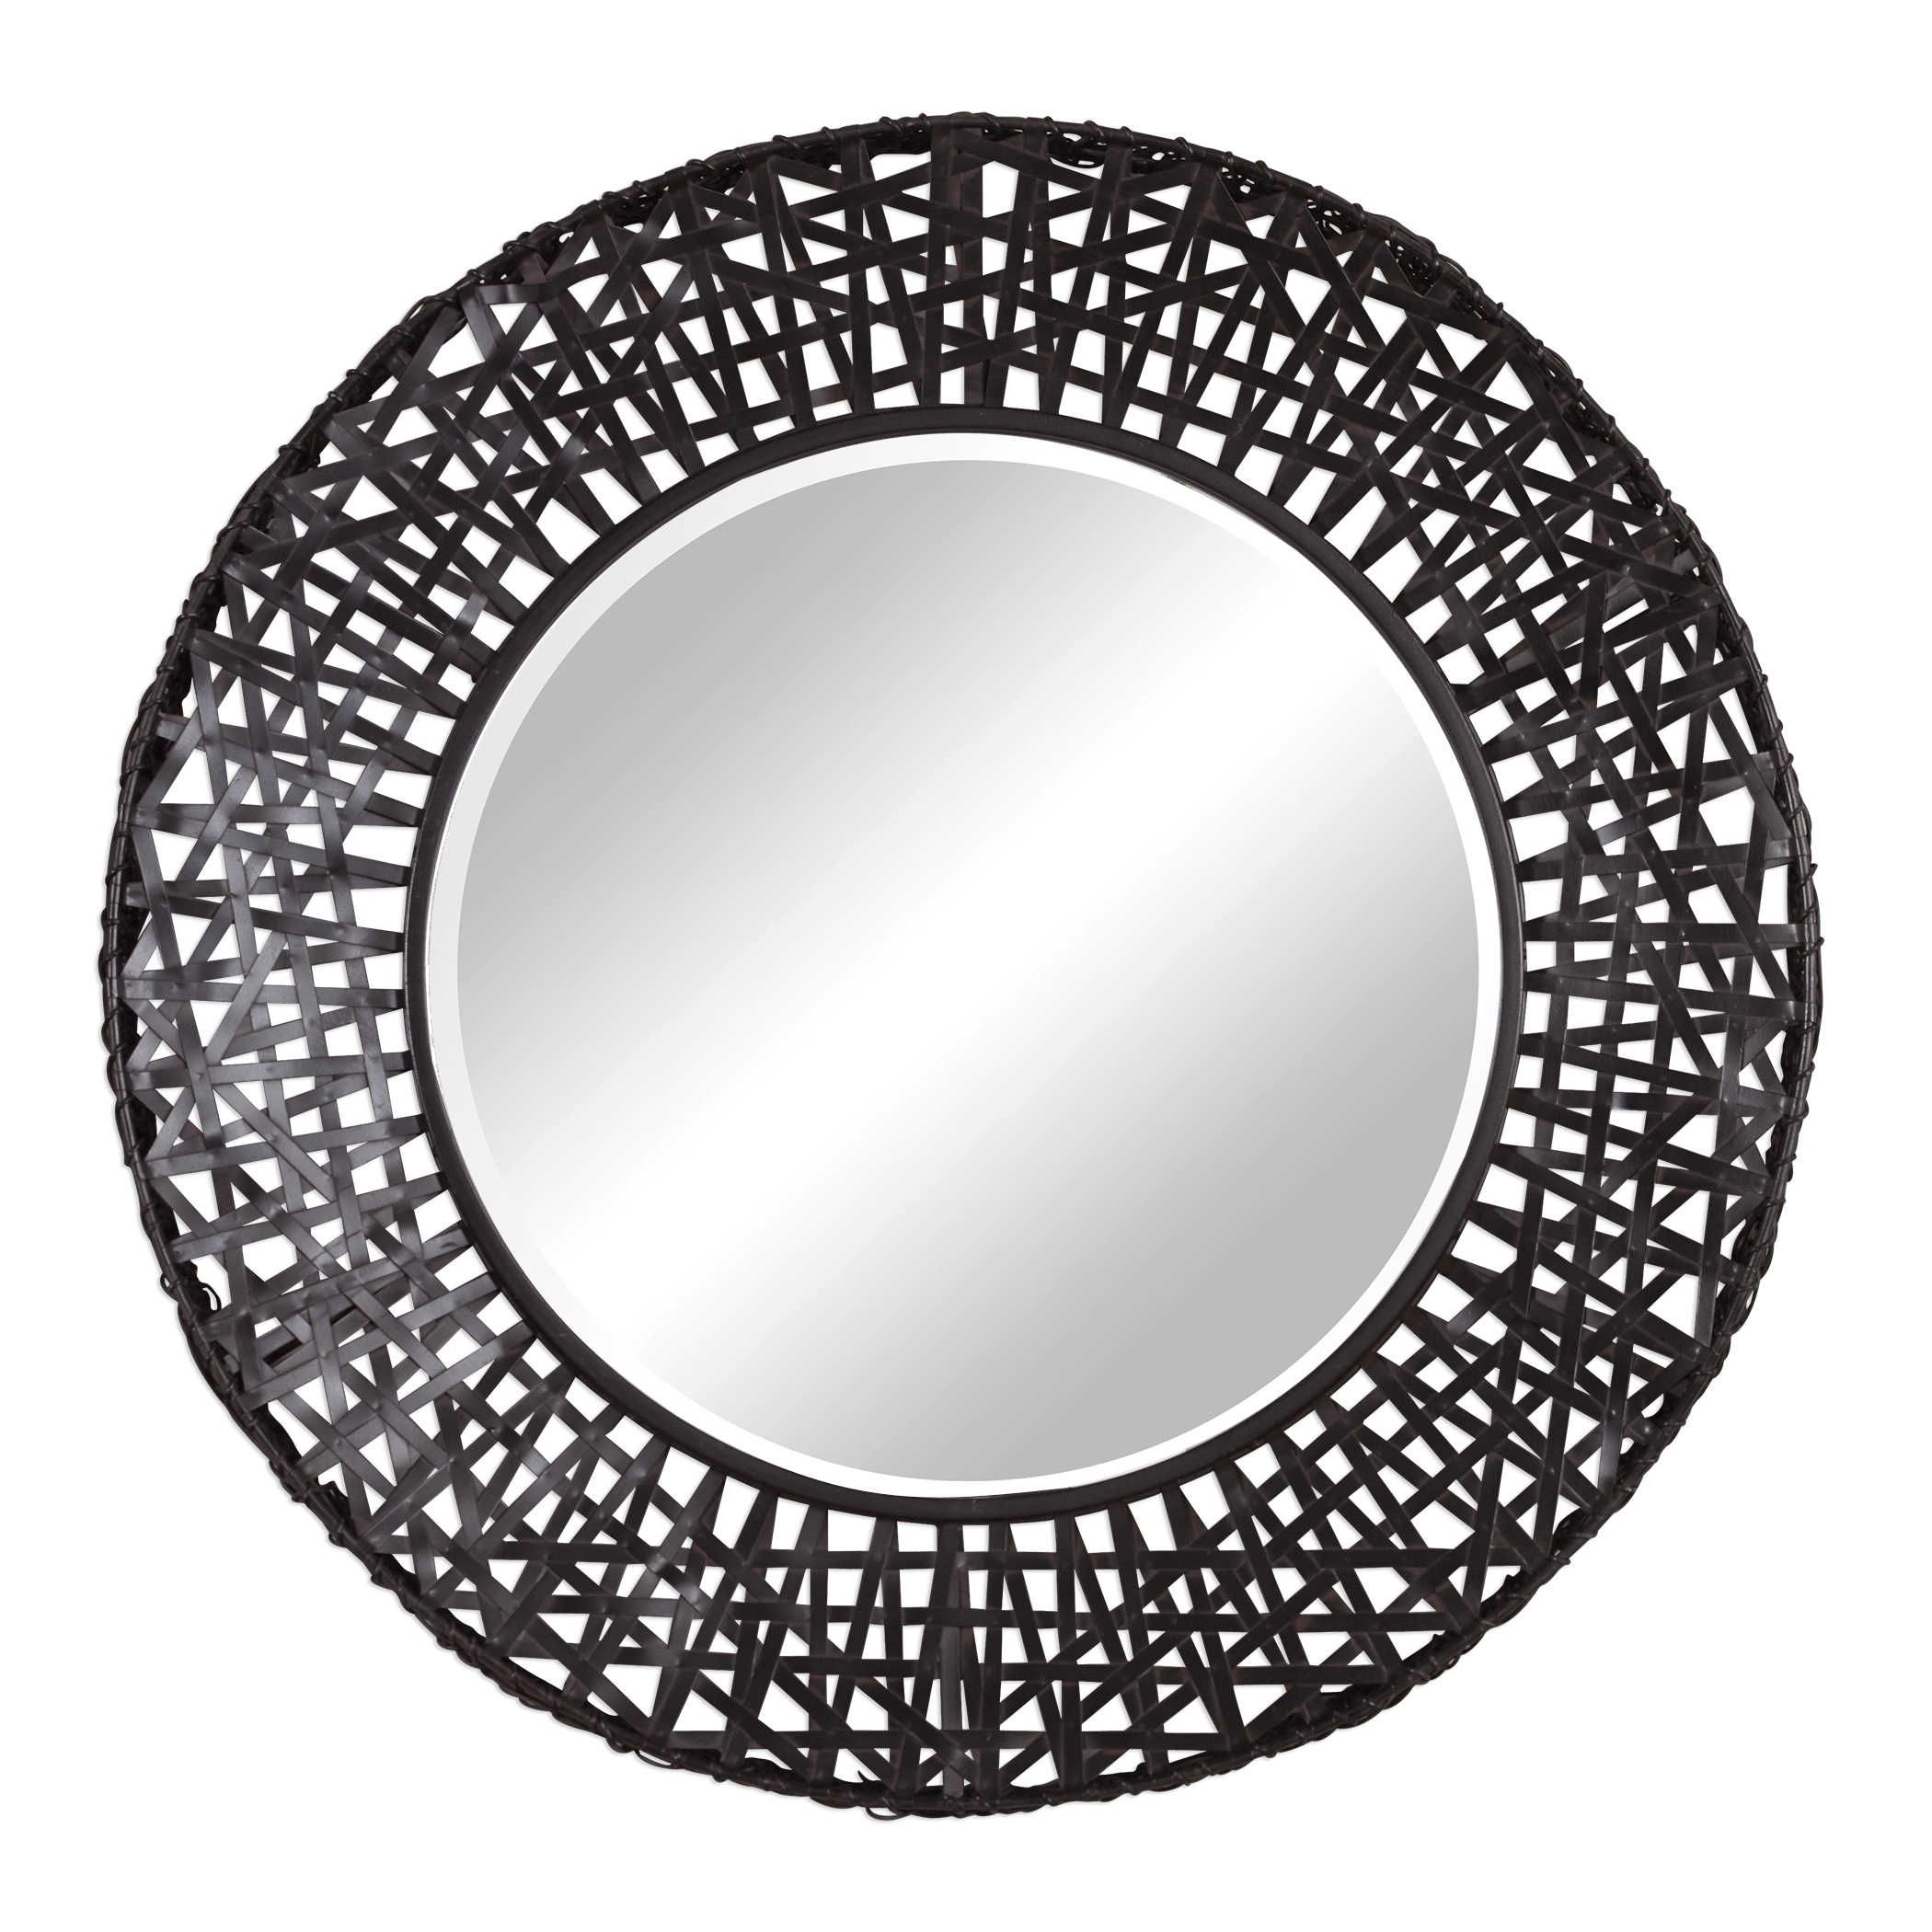 Woven Black Metal Strips Round Wall Mirror Modern Large 37 Throughout Scalloped Round Wall Mirrors (View 9 of 15)